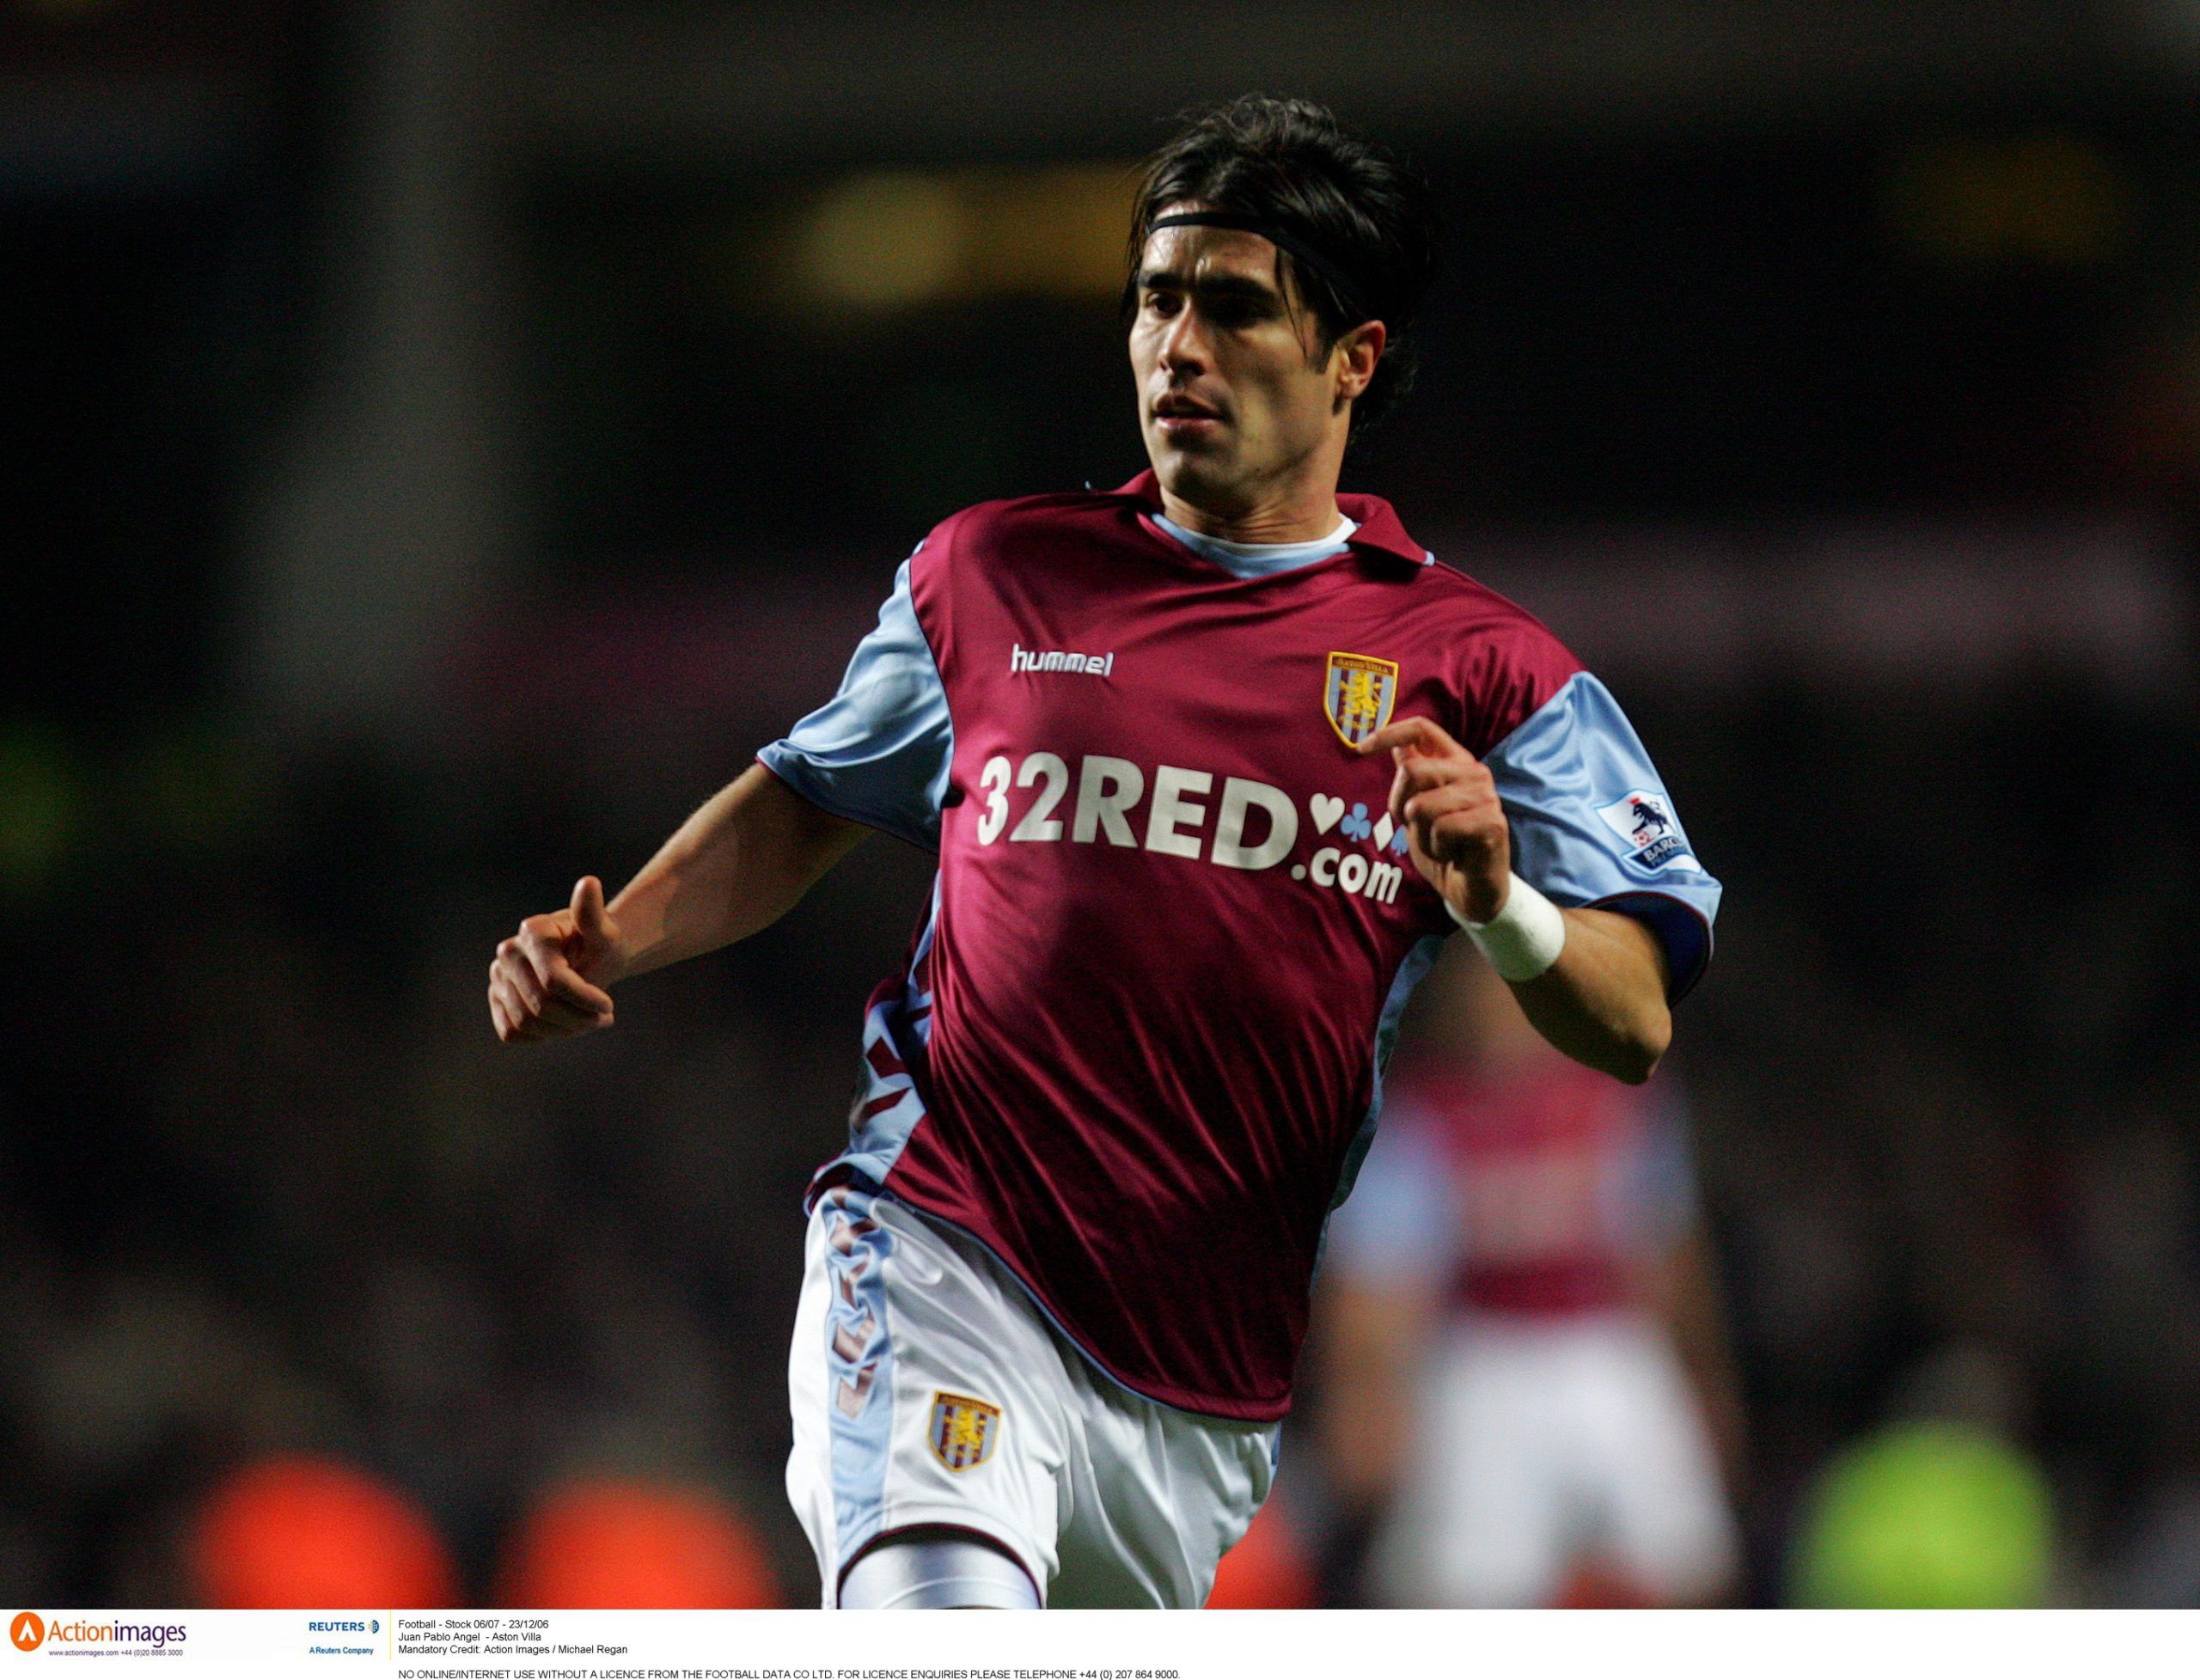 Football - Stock 06/07 - 23/12/06 
Juan Pablo Angel  - Aston Villa  
Mandatory Credit: Action Images / Michael Regan 
NO ONLINE/INTERNET USE WITHOUT A LICENCE FROM THE FOOTBALL DATA CO LTD. FOR LICENCE ENQUIRIES PLEASE TELEPHONE +44 (0) 207 864 9000.